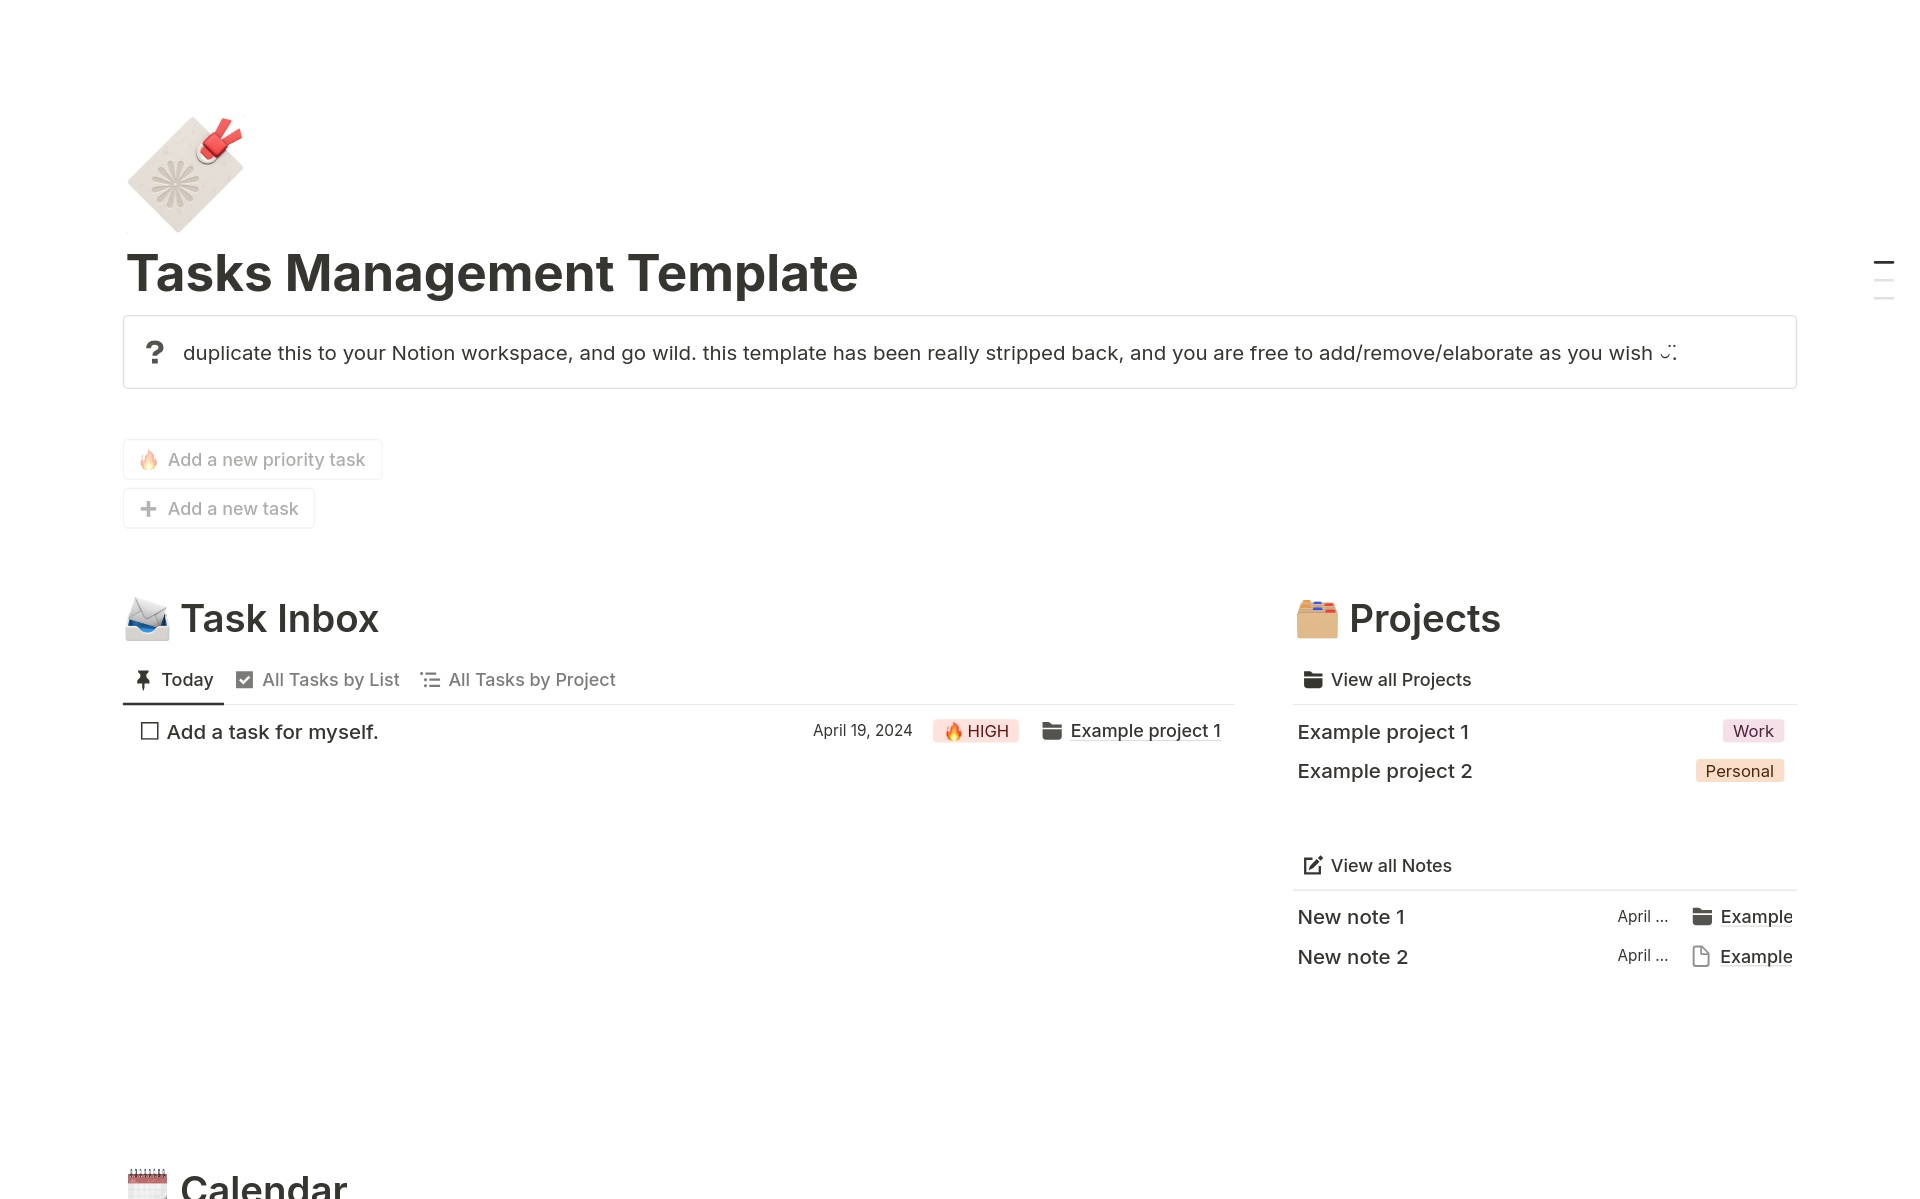 Simple multi-project task management template with calendar view.